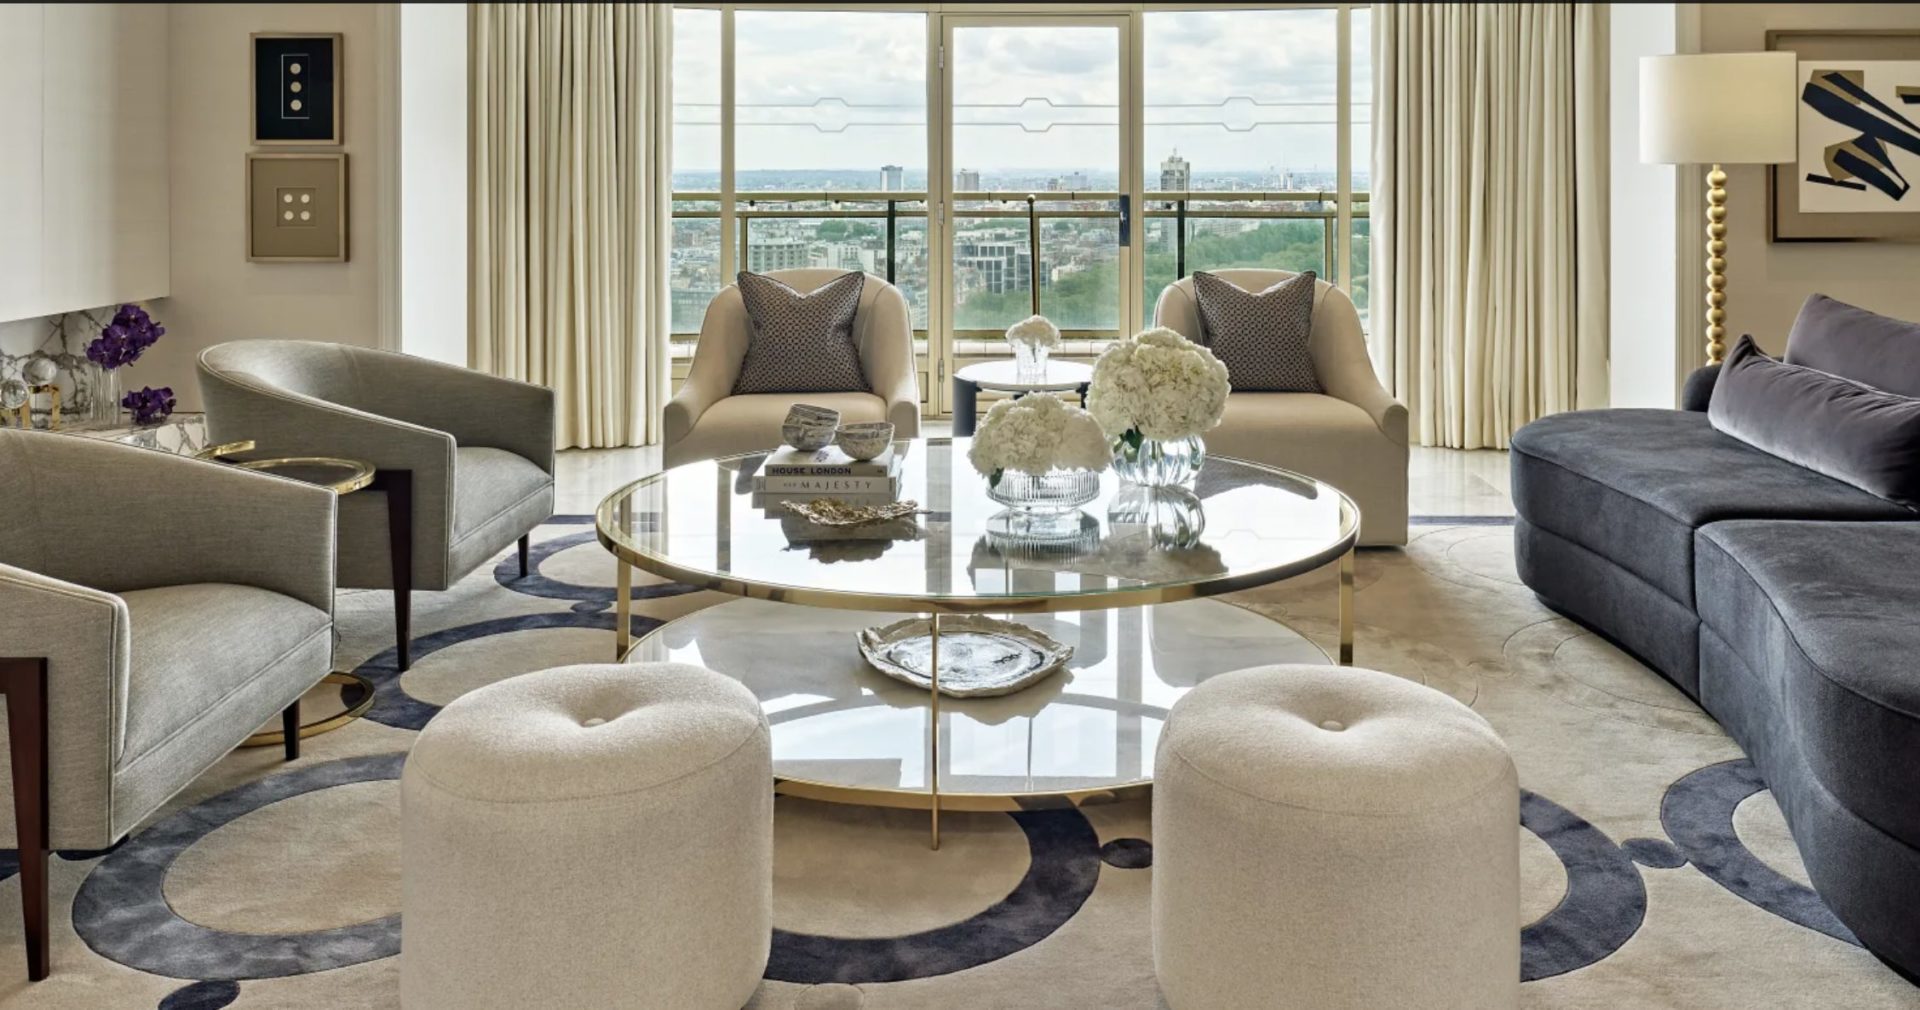 LUXURIA LIFESTYLE MAGAZINE REVIEWS THE LUXURY PENTHOUSE SUITES AT THE HILTON PARK LANE HOTEL IN LONDON